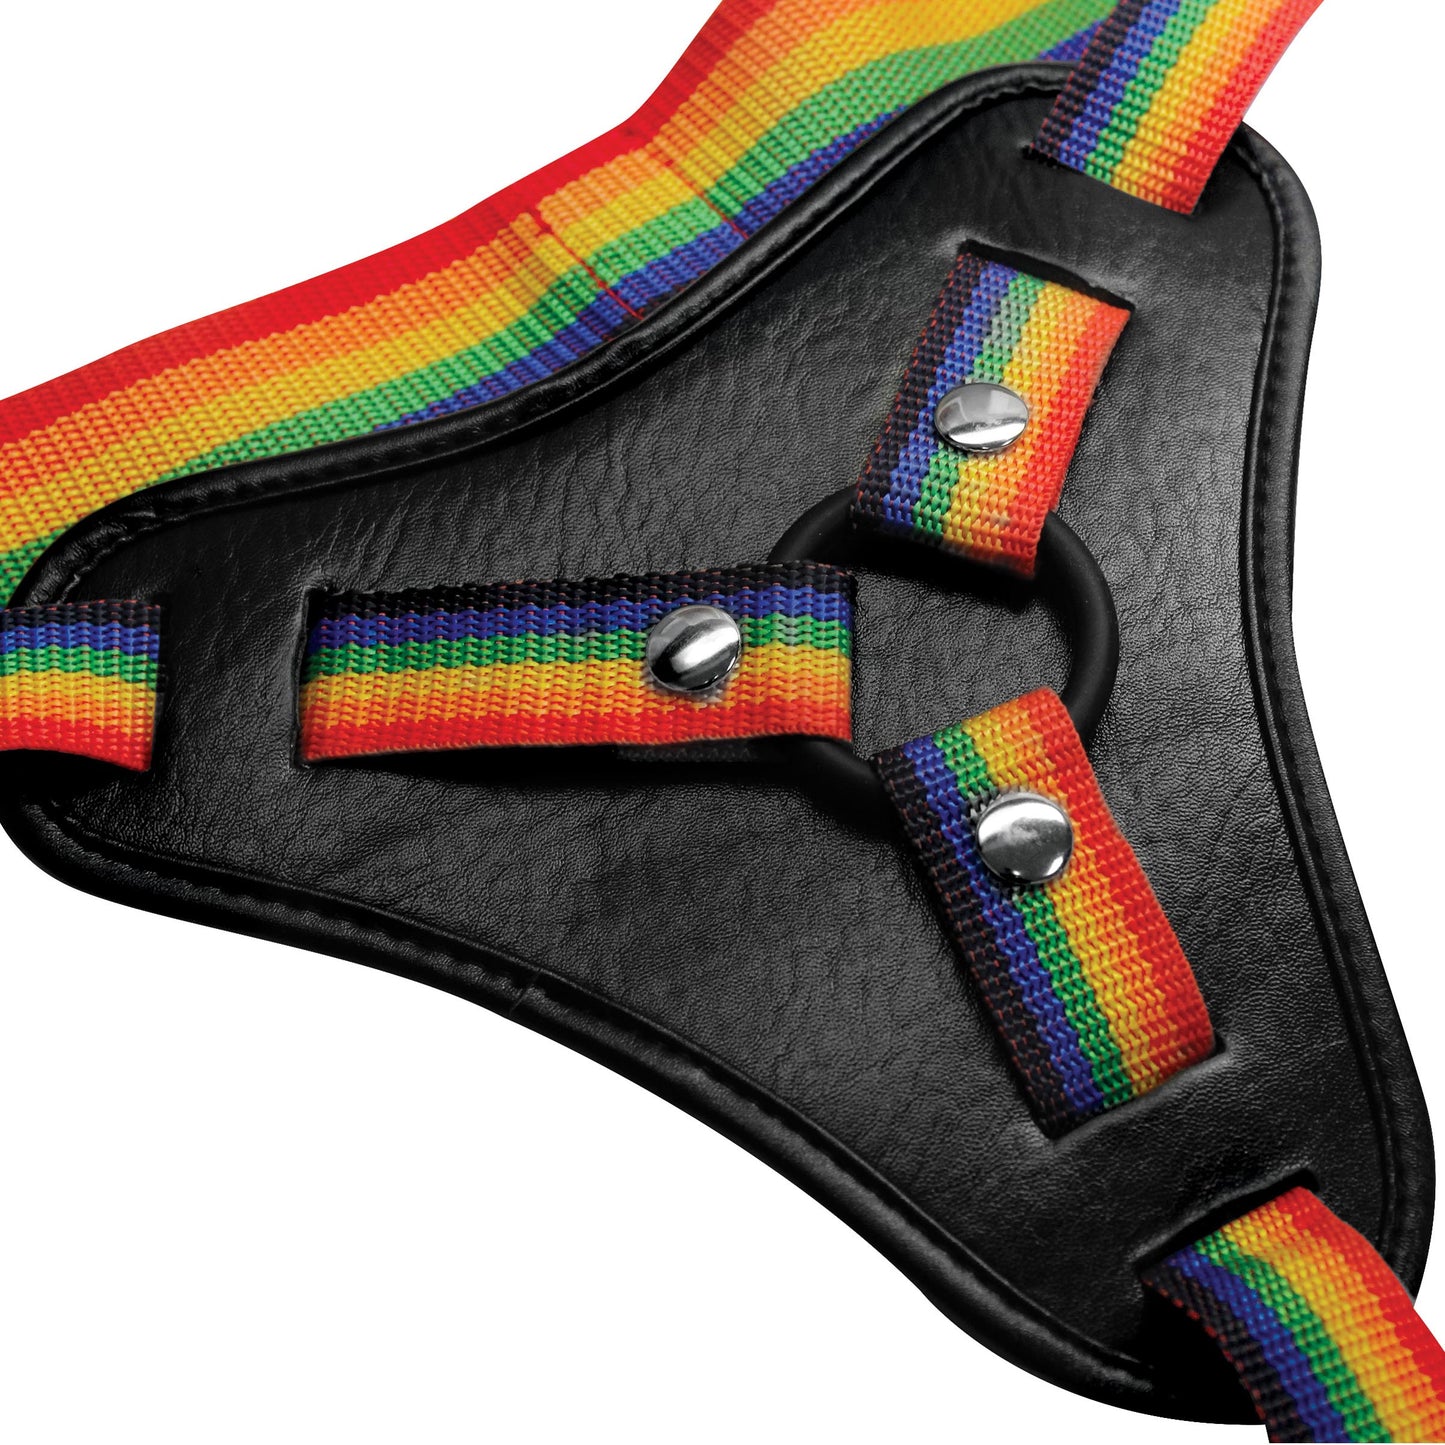 Rainbow Strap On Harness with Silicone O-Rings - UABDSM